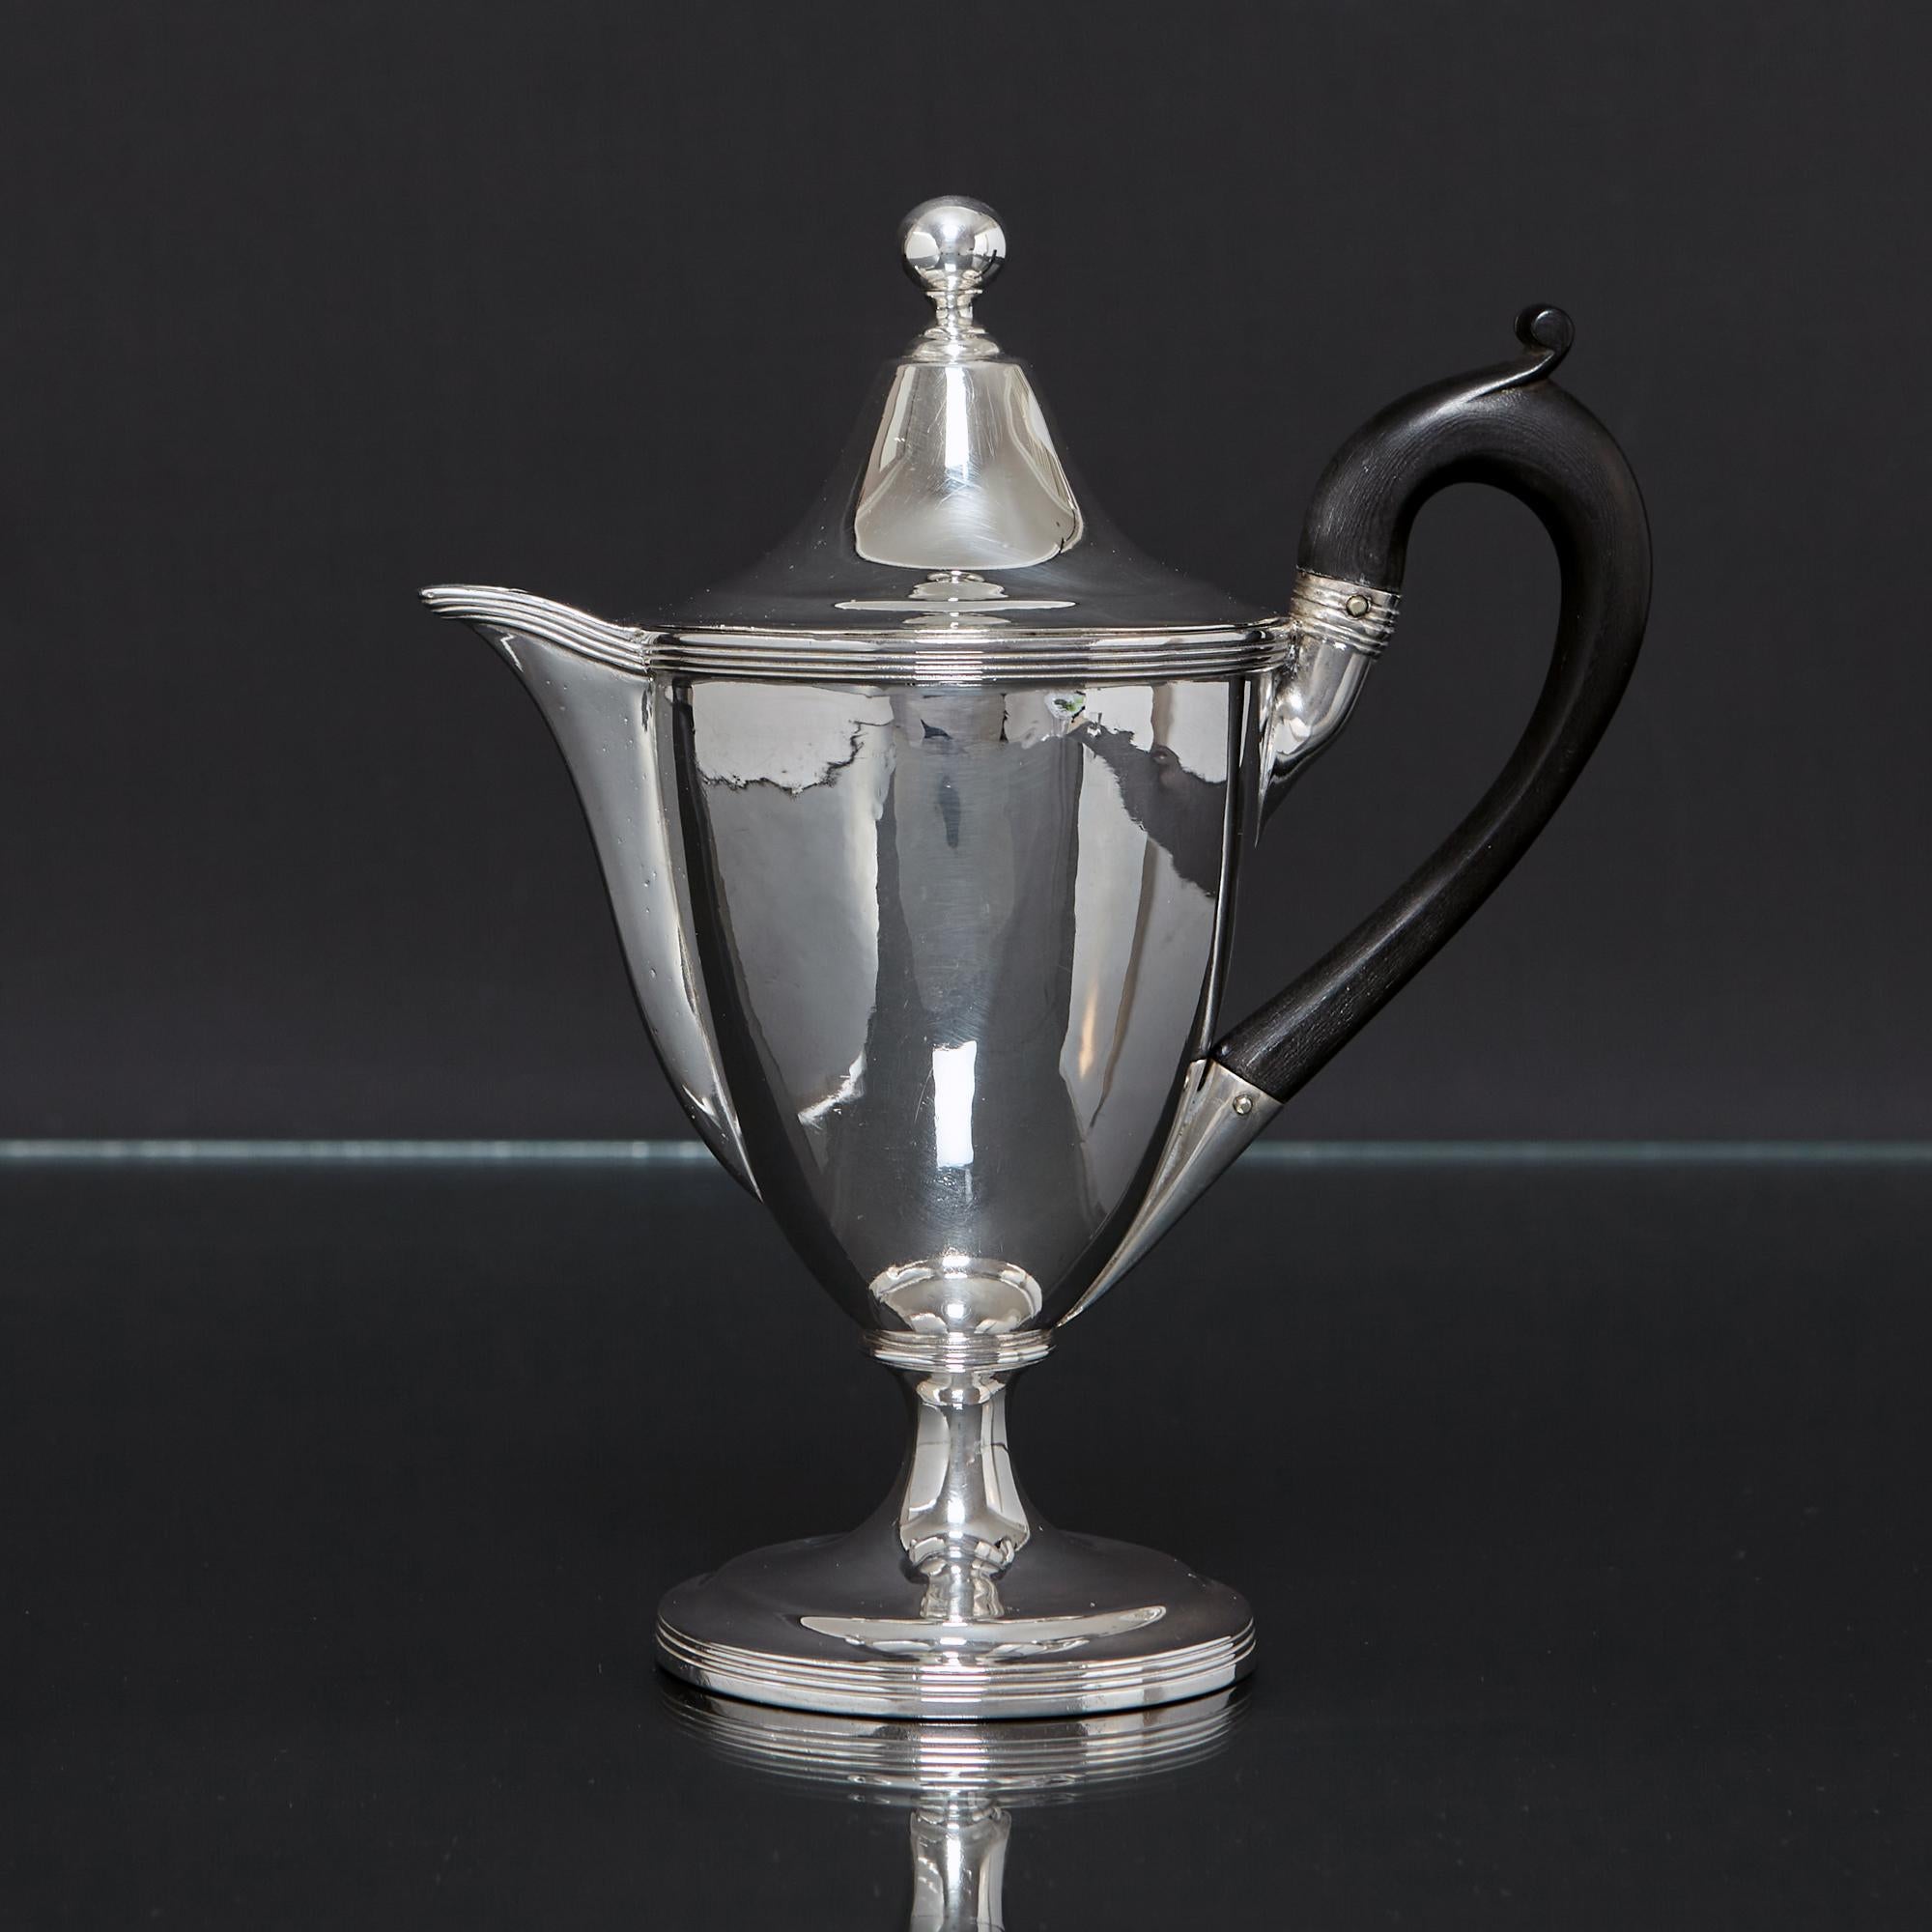 This is a lovely example and rare configuration of the heated silver gravy jug known as an argyle.  This antique silver argyle is lidded and fitted with a hot water panel in the base to keep the gravy hot. Boiling water is poured in through the